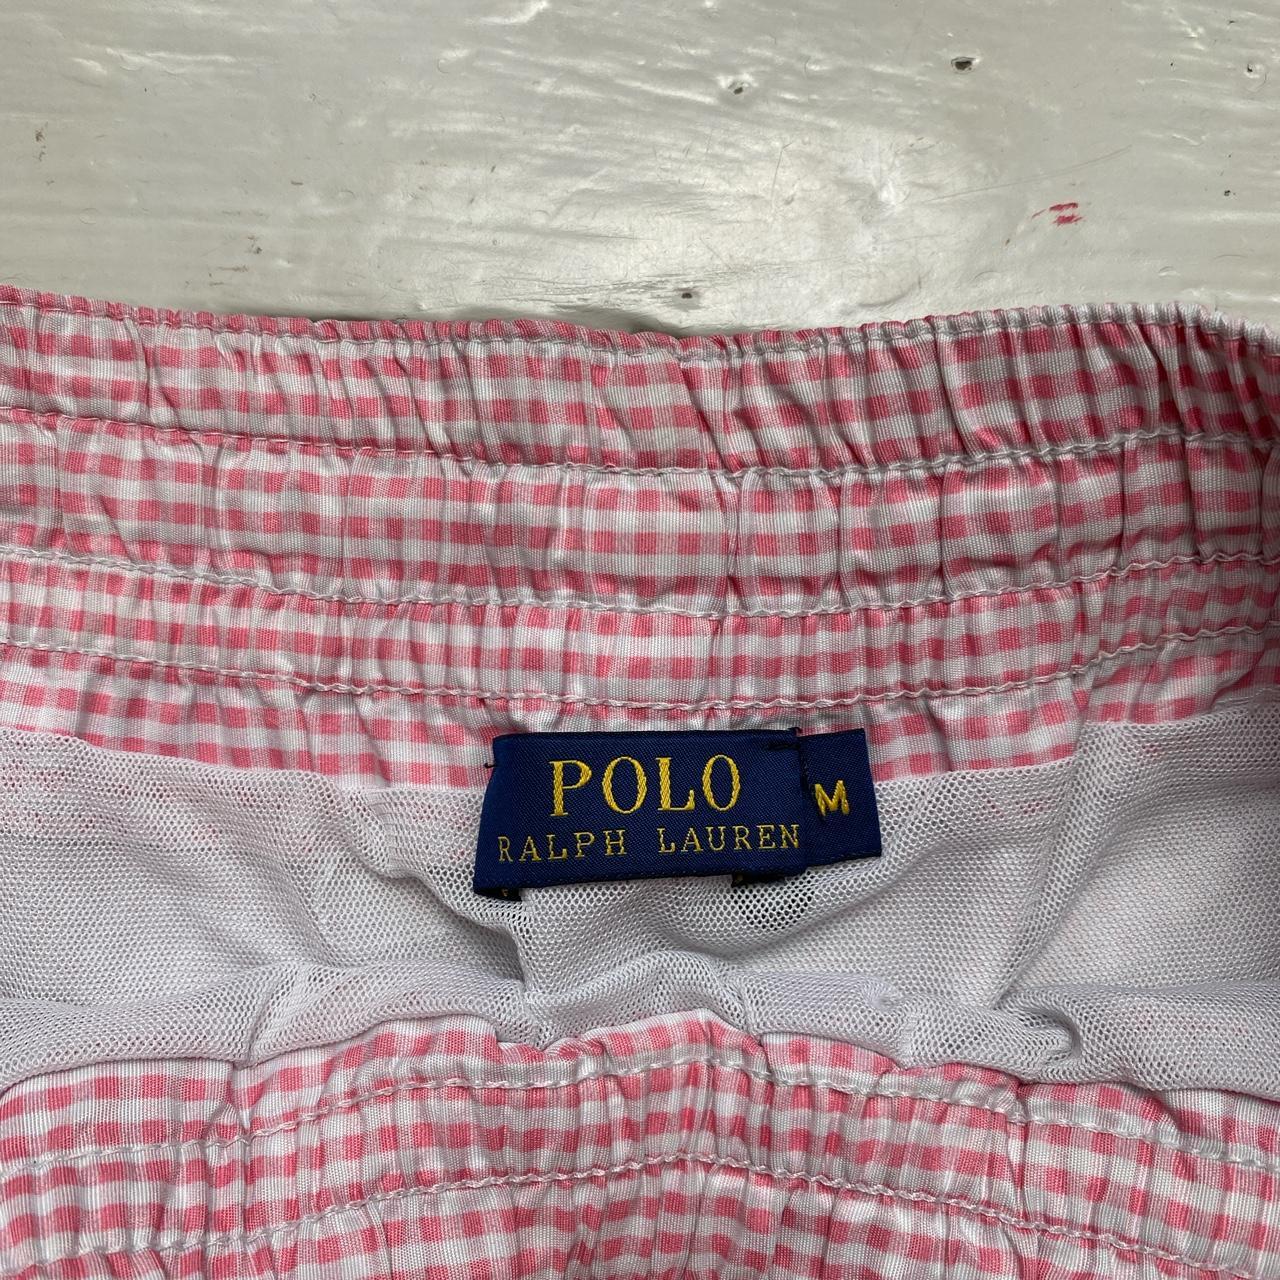 Ralph Lauren Polo Checked Pink and White Swim Shorts